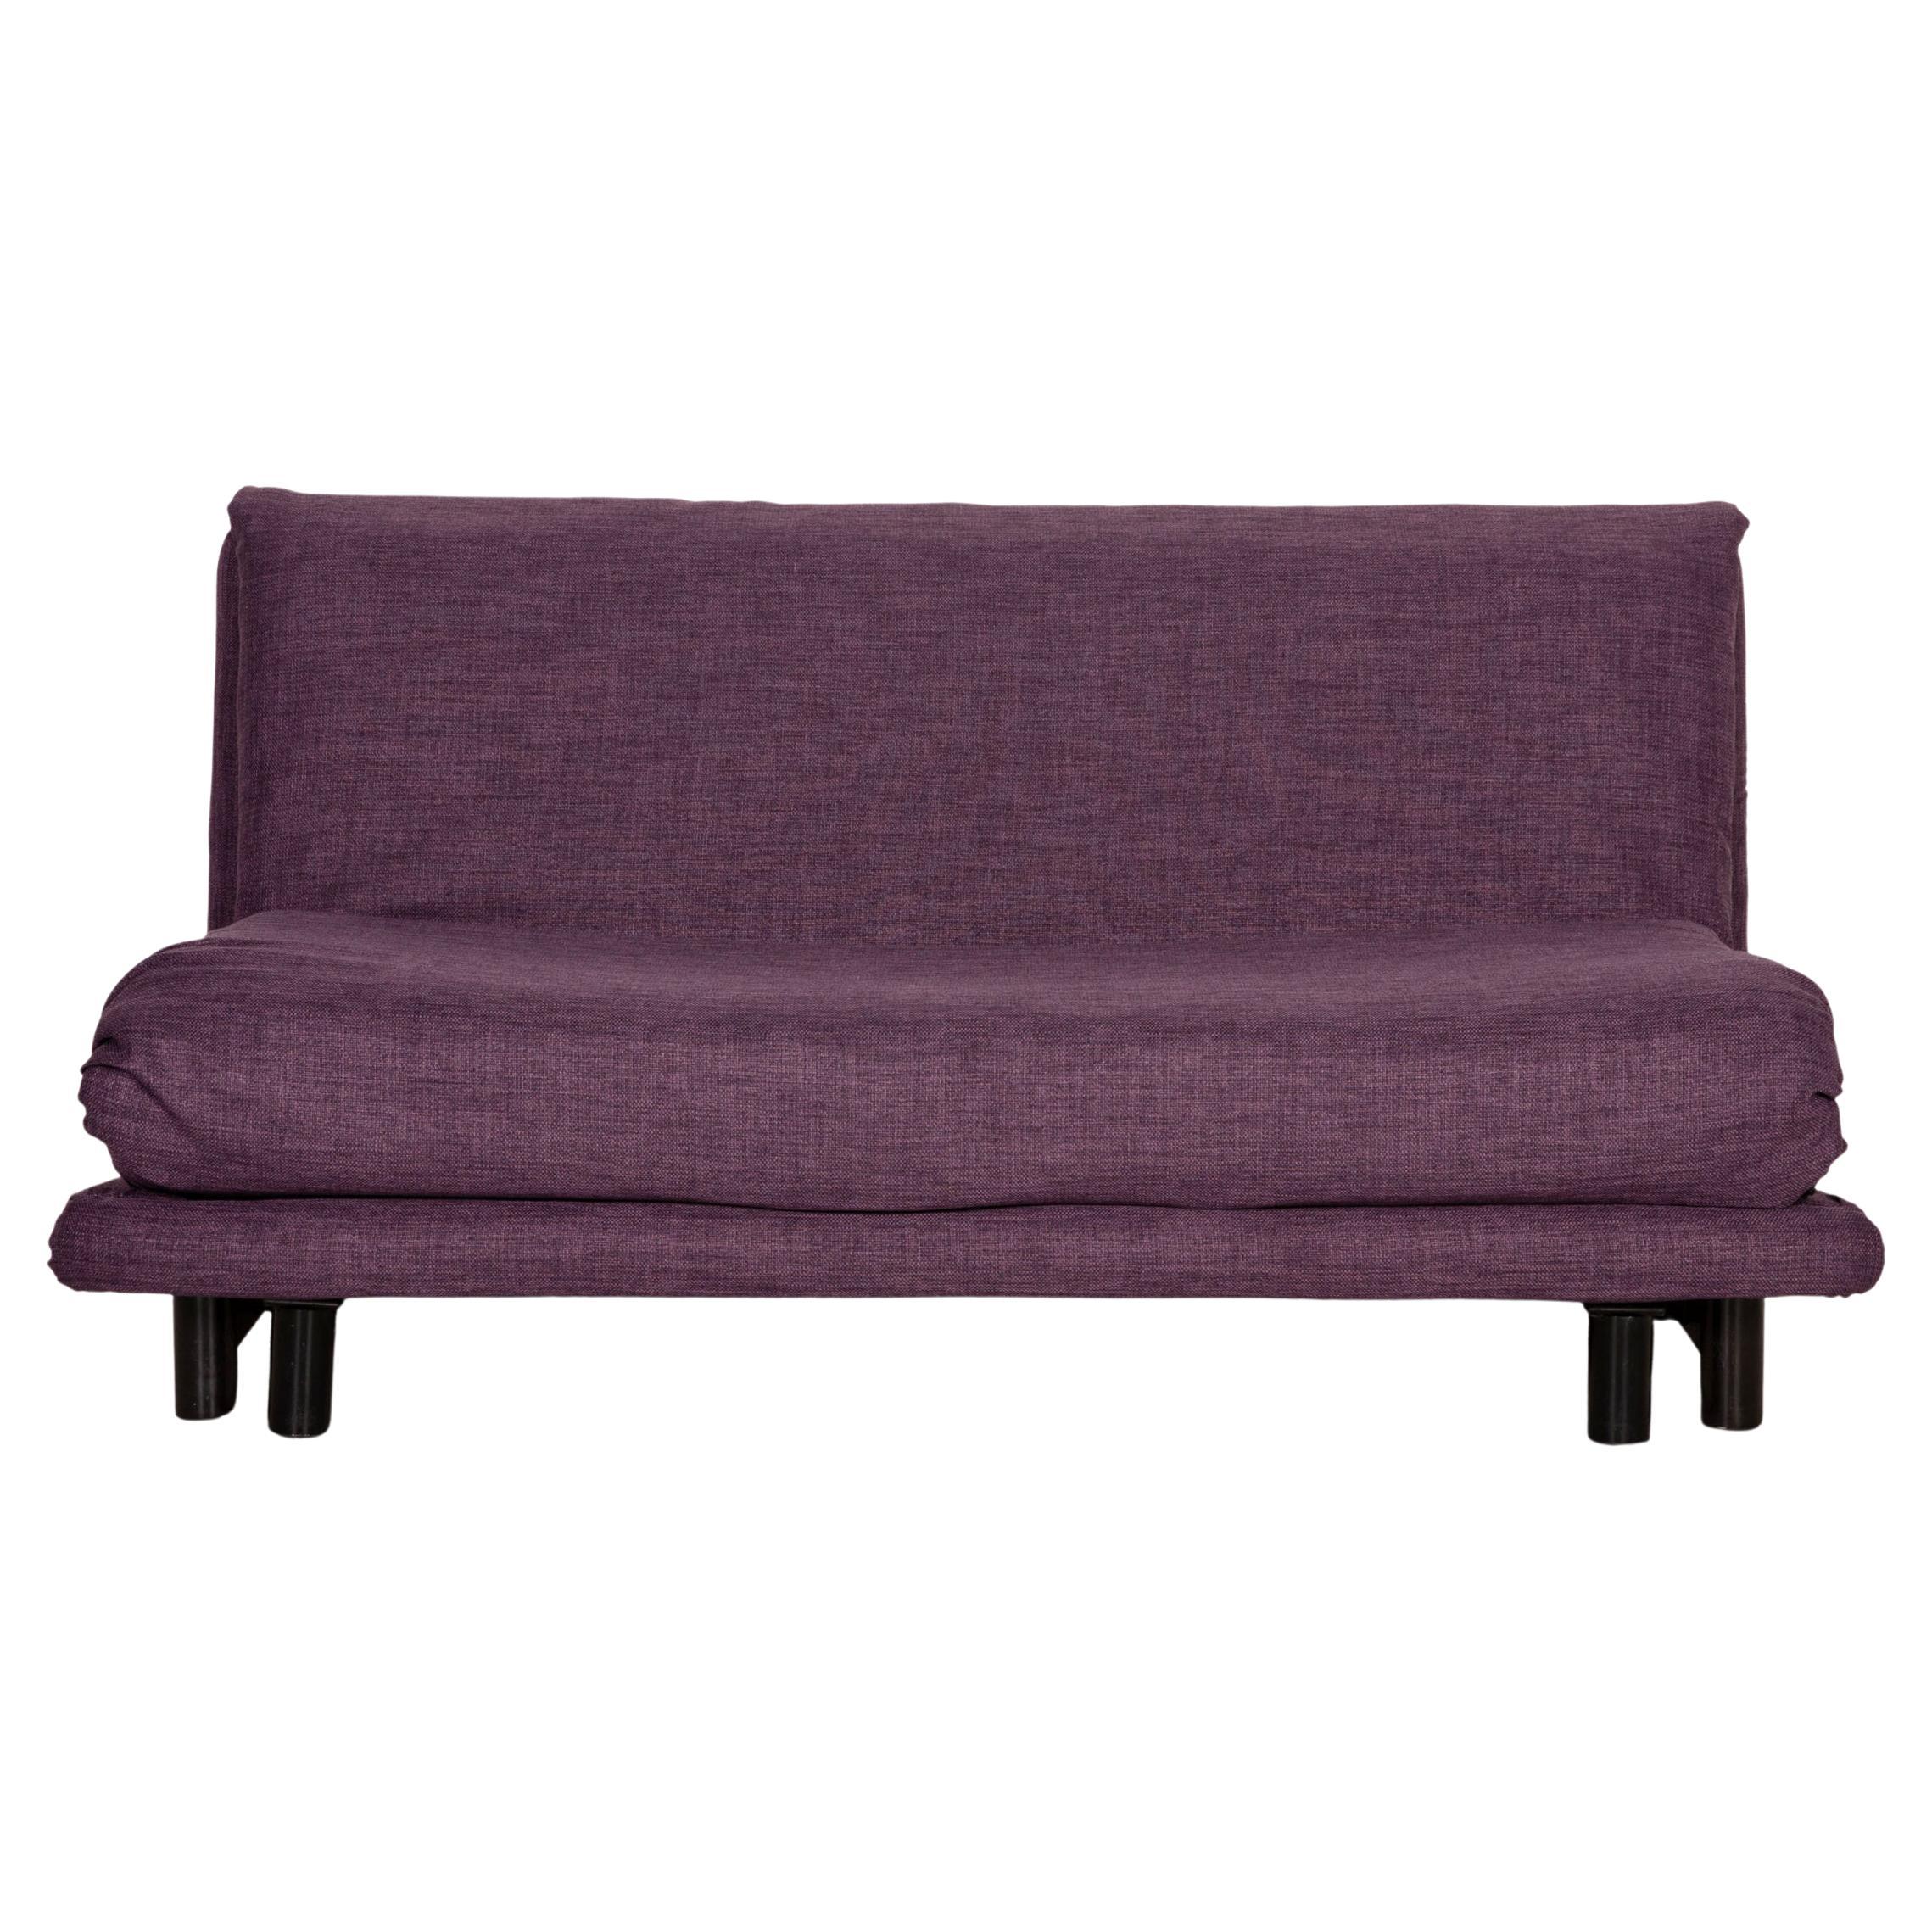 Ligne Roset Multy Fabric Sofa Purple Three-Seater Couch Function Sleeping For Sale